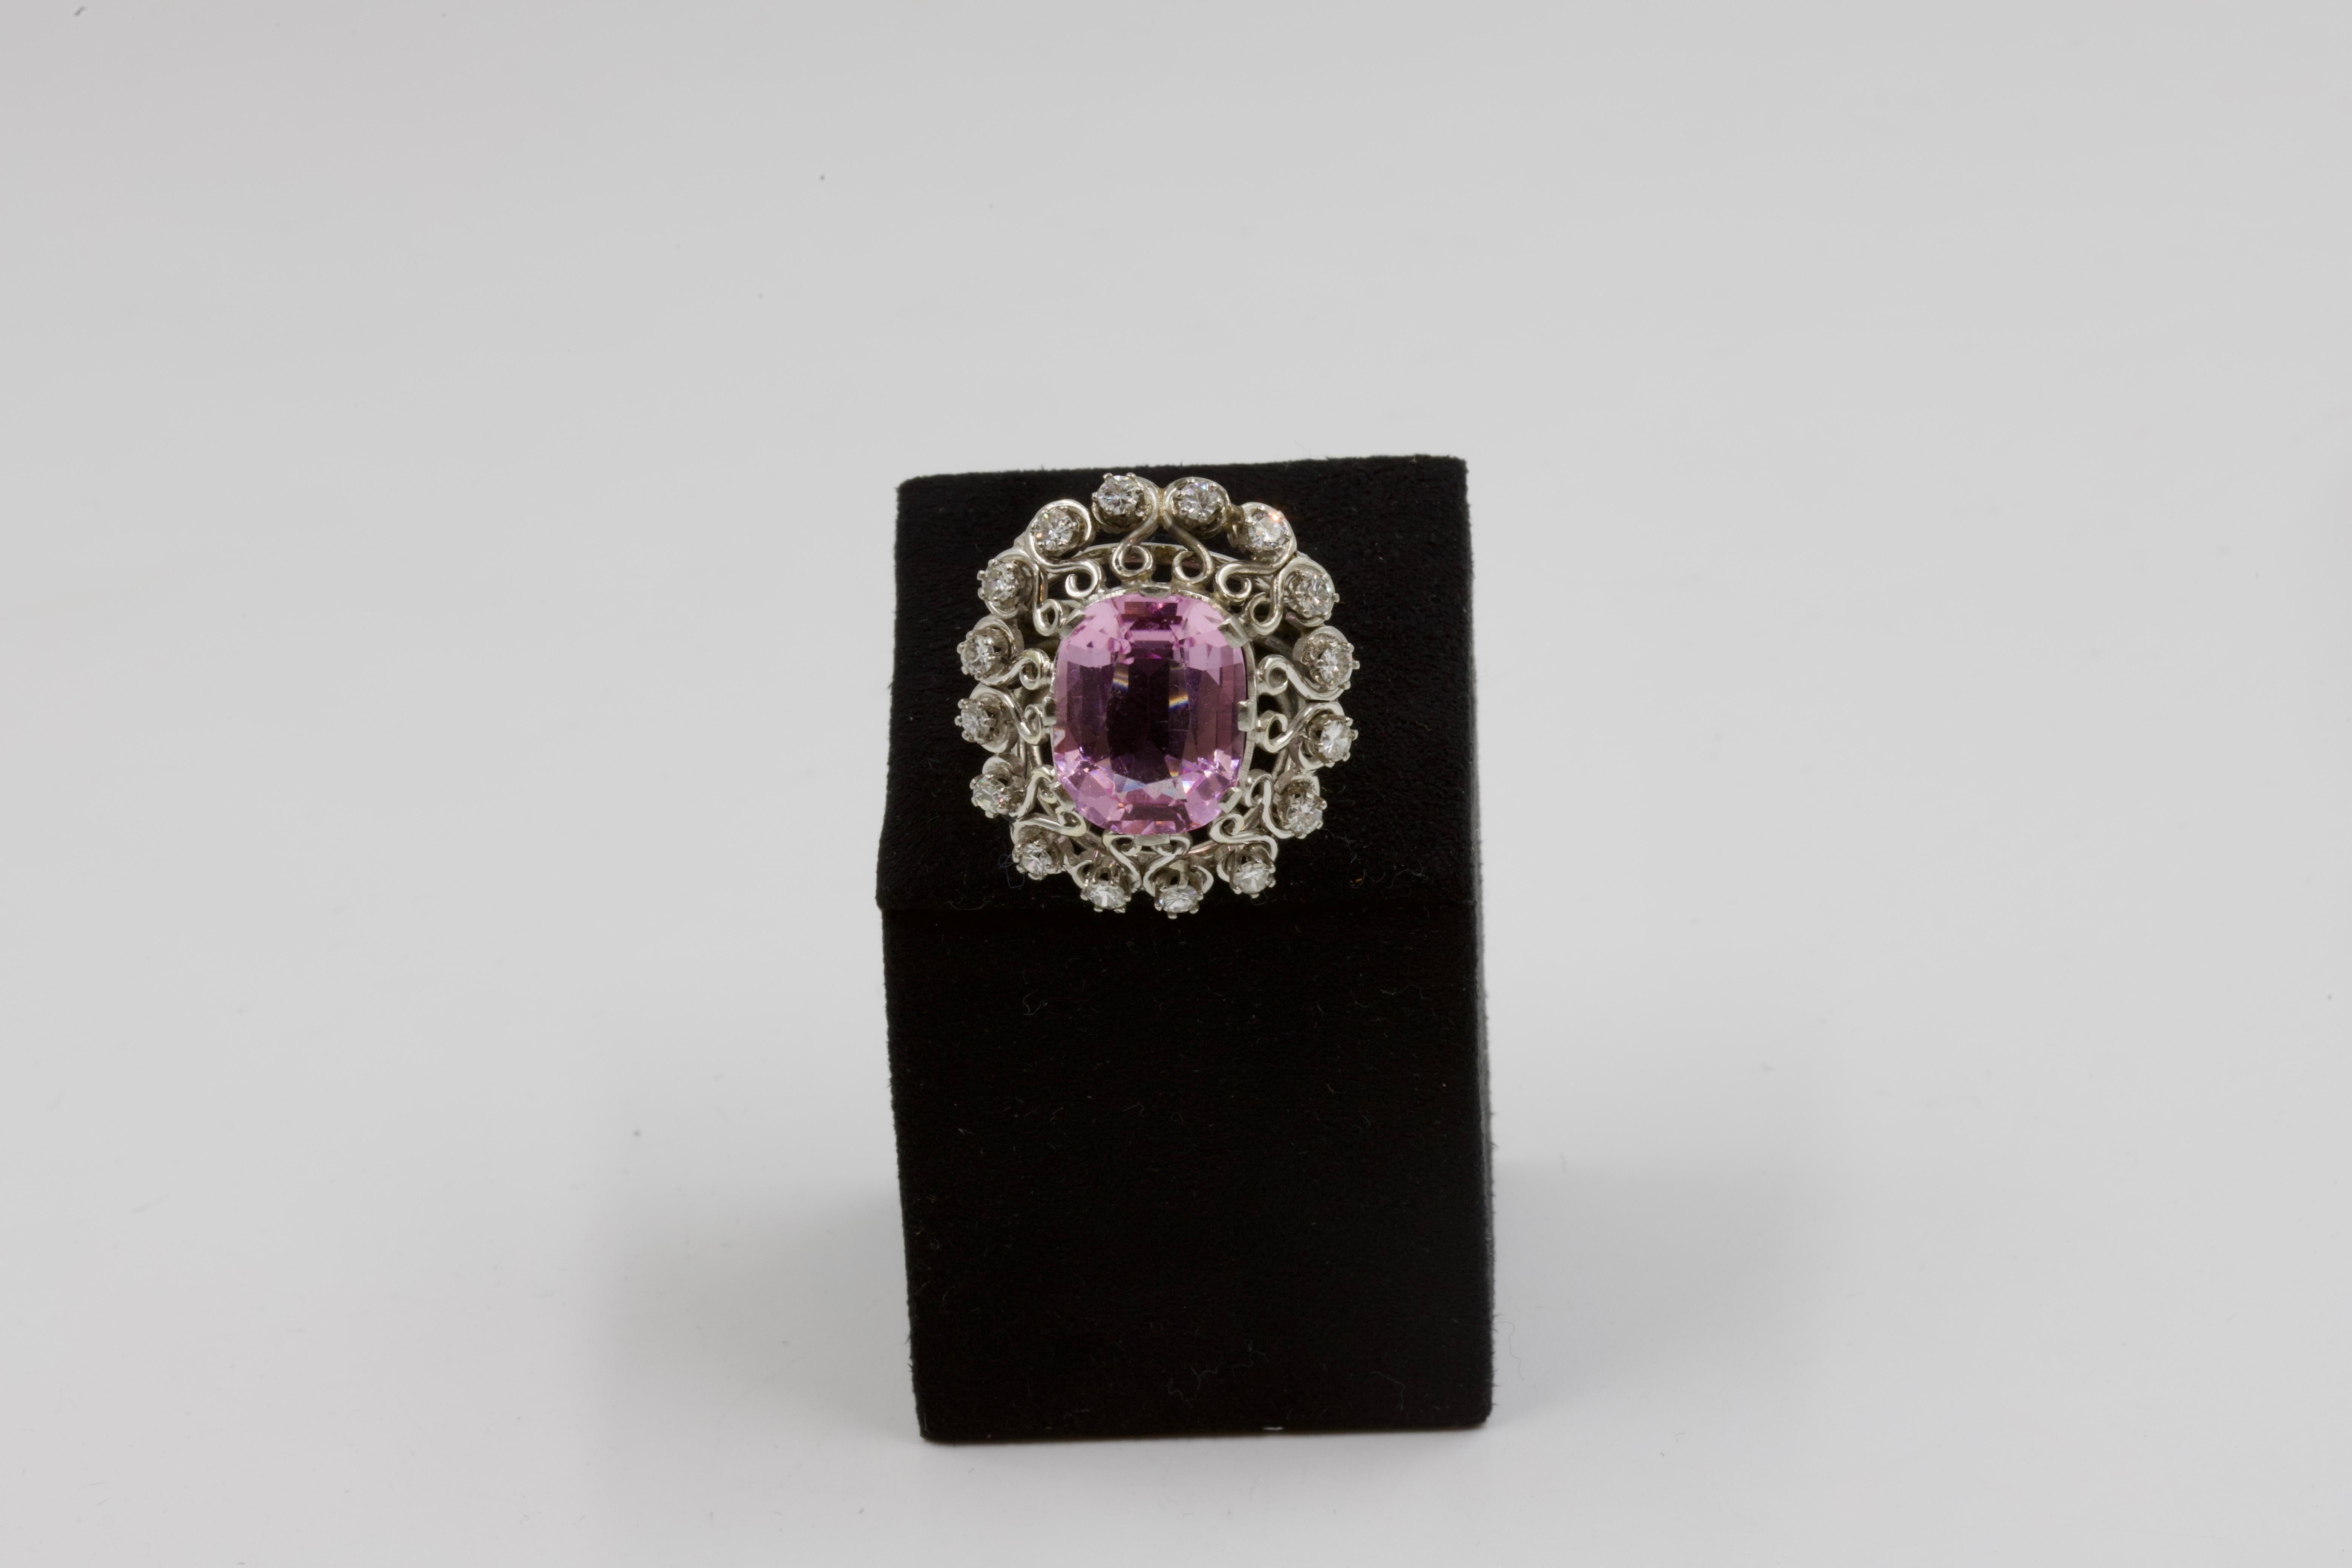 Spectacular cocktail ring, 18 K white gold, centered with a large oval-cut kunzite, openwork surround, filigree with heart motifs, and set with 16 brilliant-cut diamonds, openwork and filigree ring, french work, circa 1960.

For Vintage